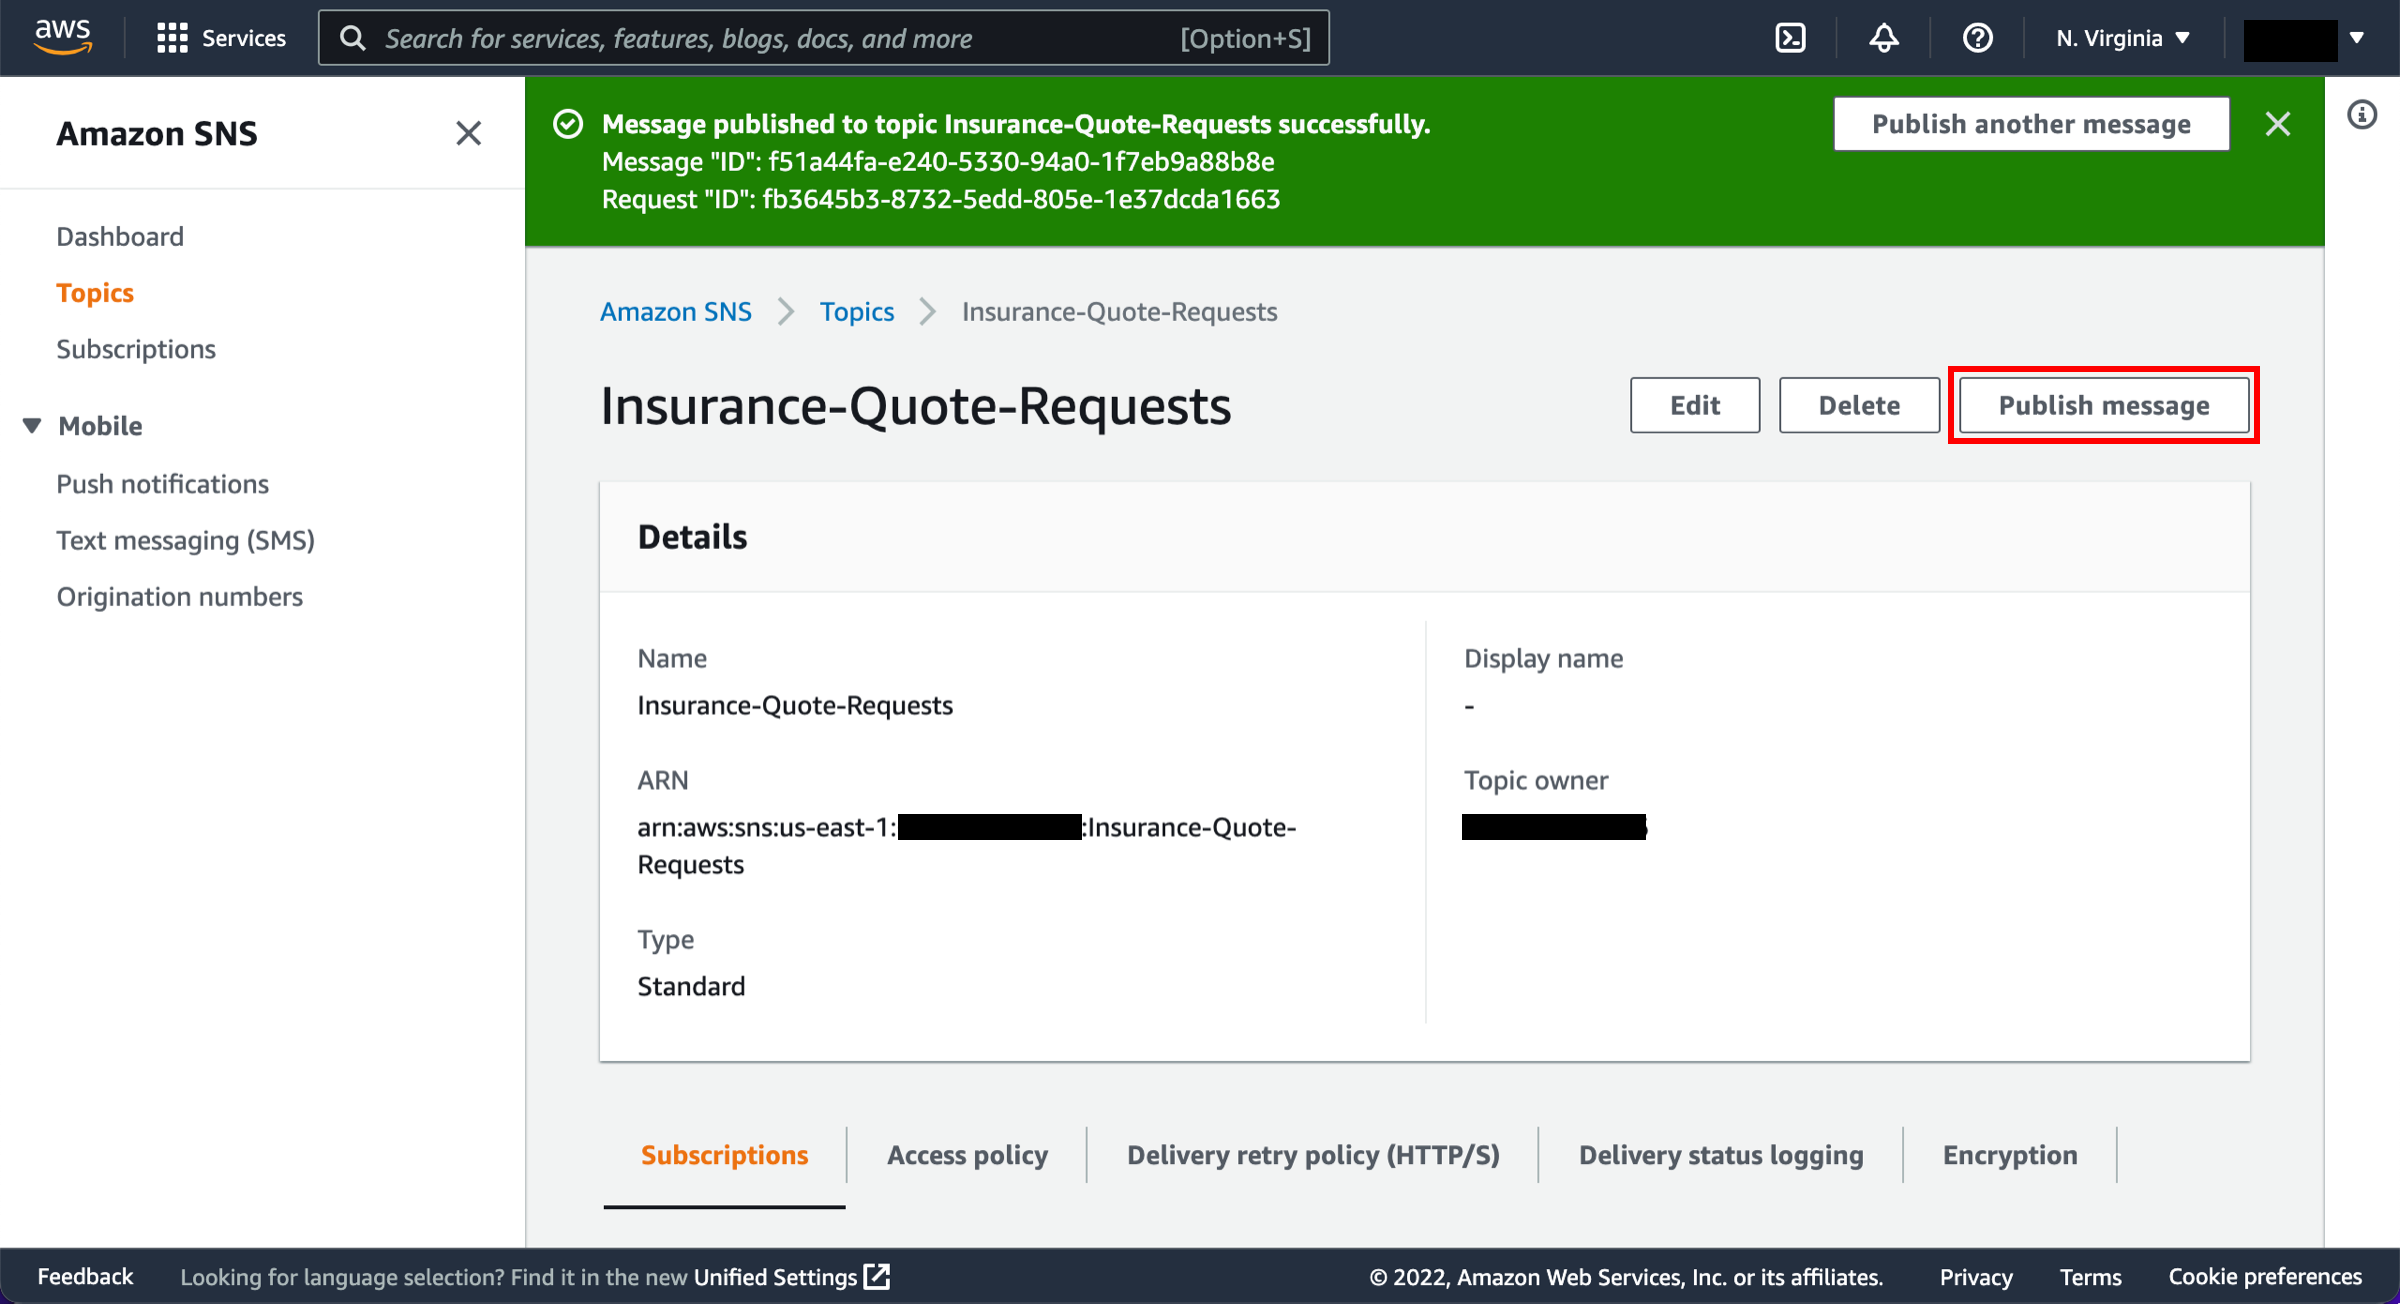 Insurance-Quote-Requests topic page, with Publish message button highlighted.